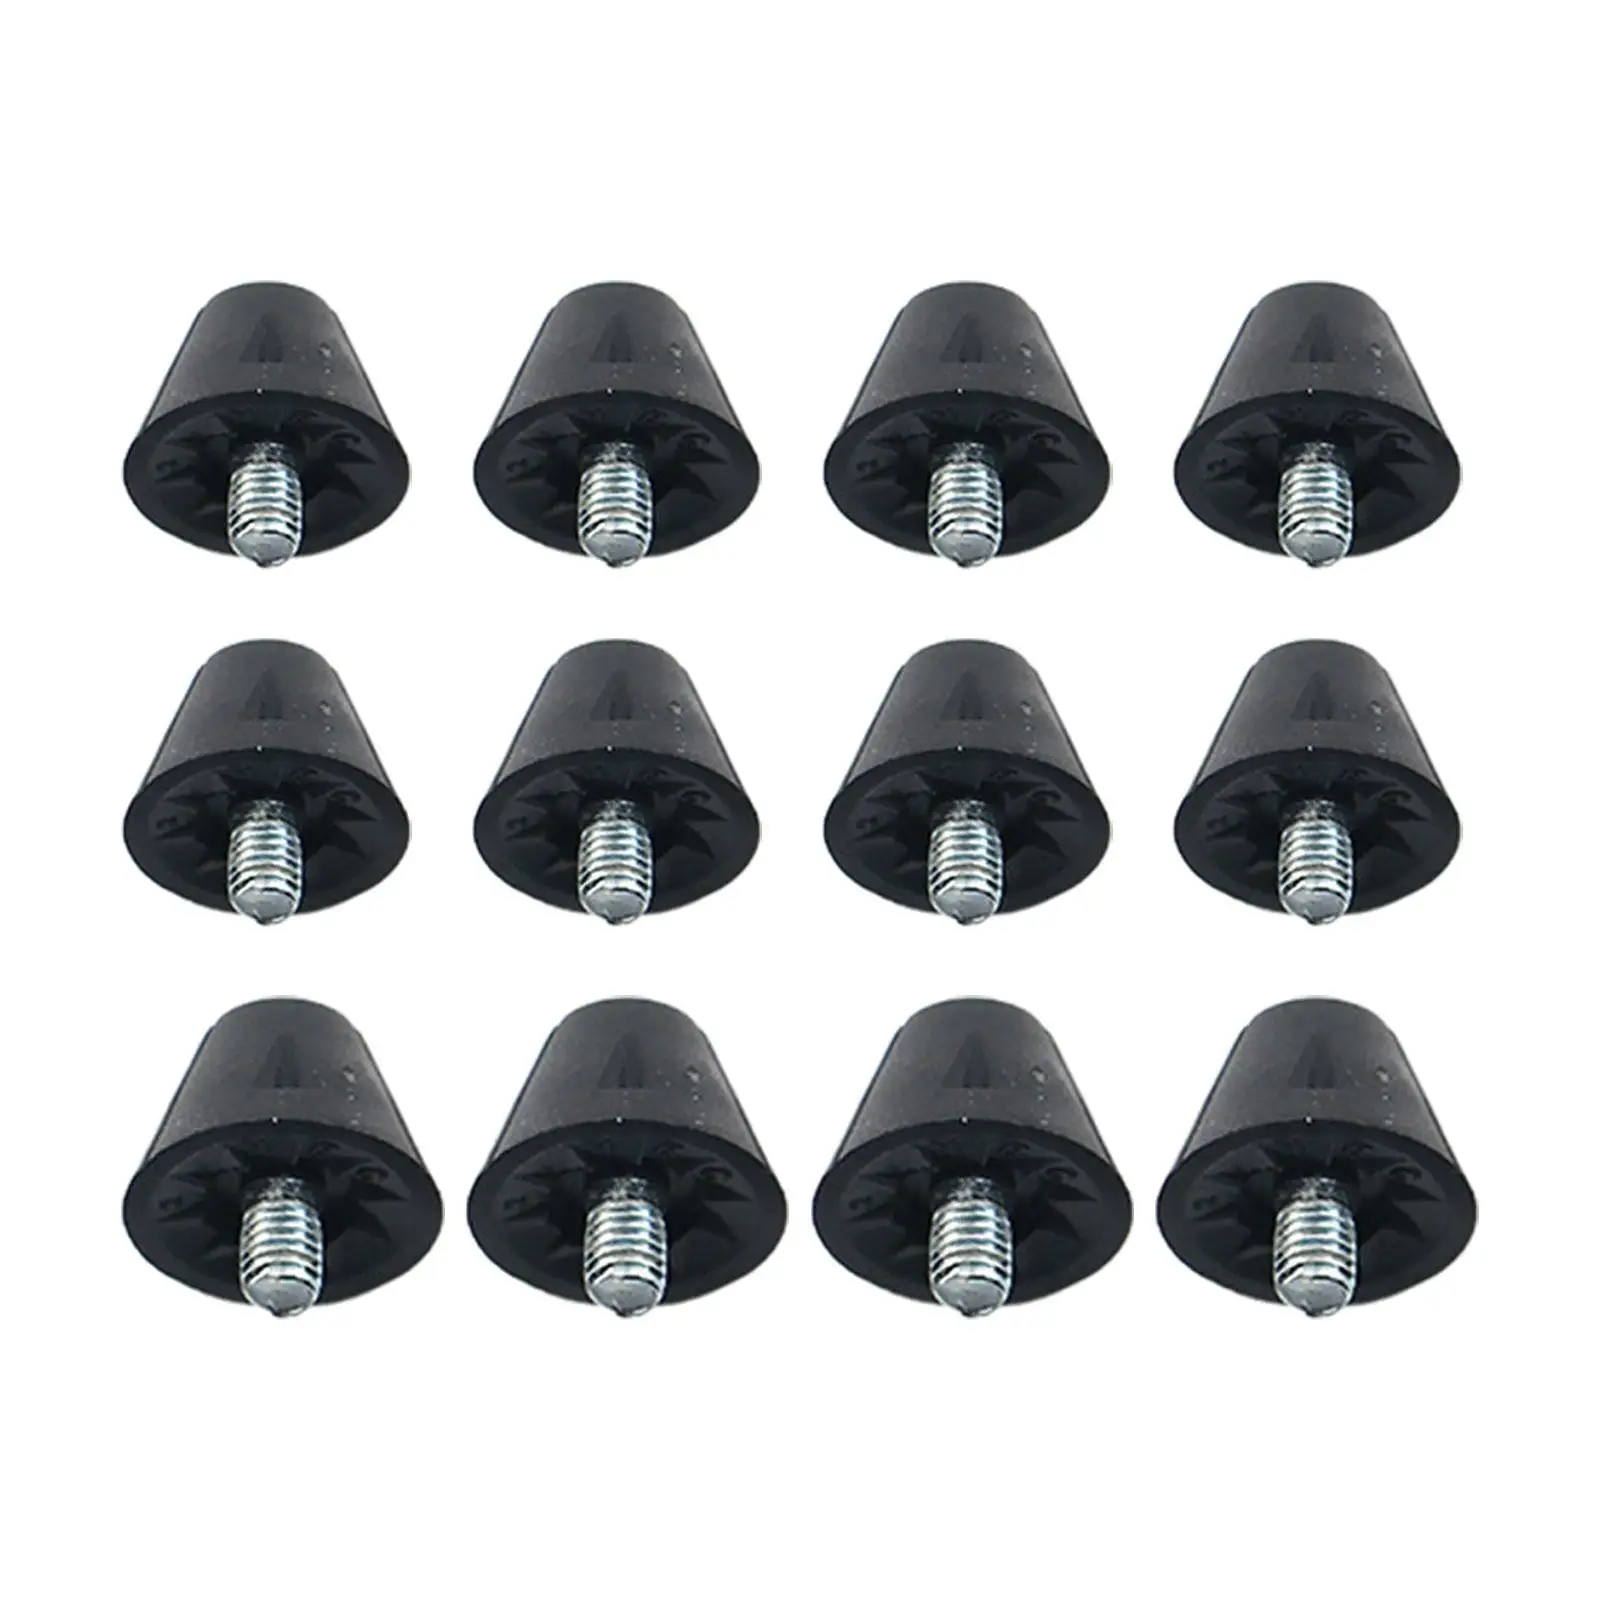 12x Football Boot Studs Portable Thread Screw 5mm Non Slip Soccer Boot Cleats for Training Indoor Outdoor Sports Competition